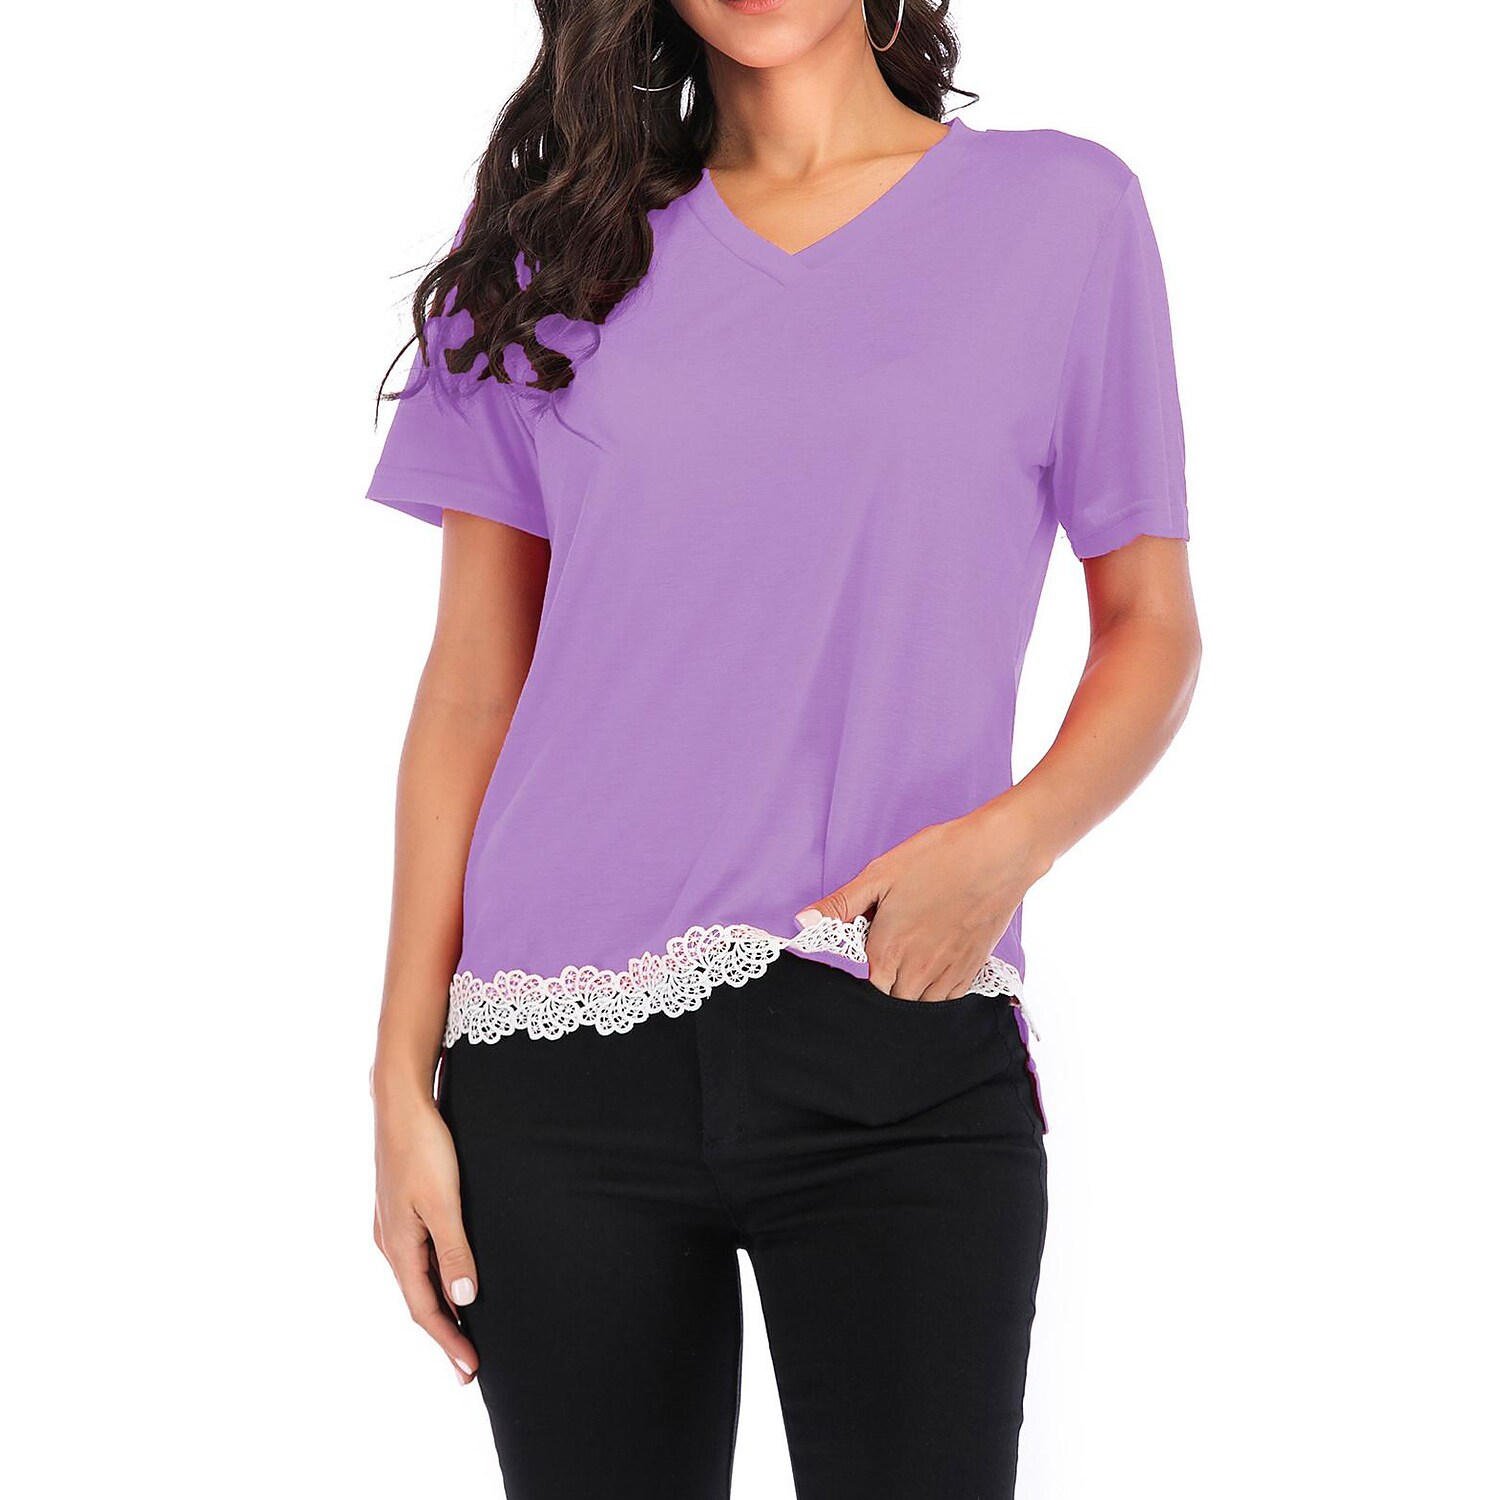 Women's sexy lace top lace t-shirt v-neck summer short sleeve